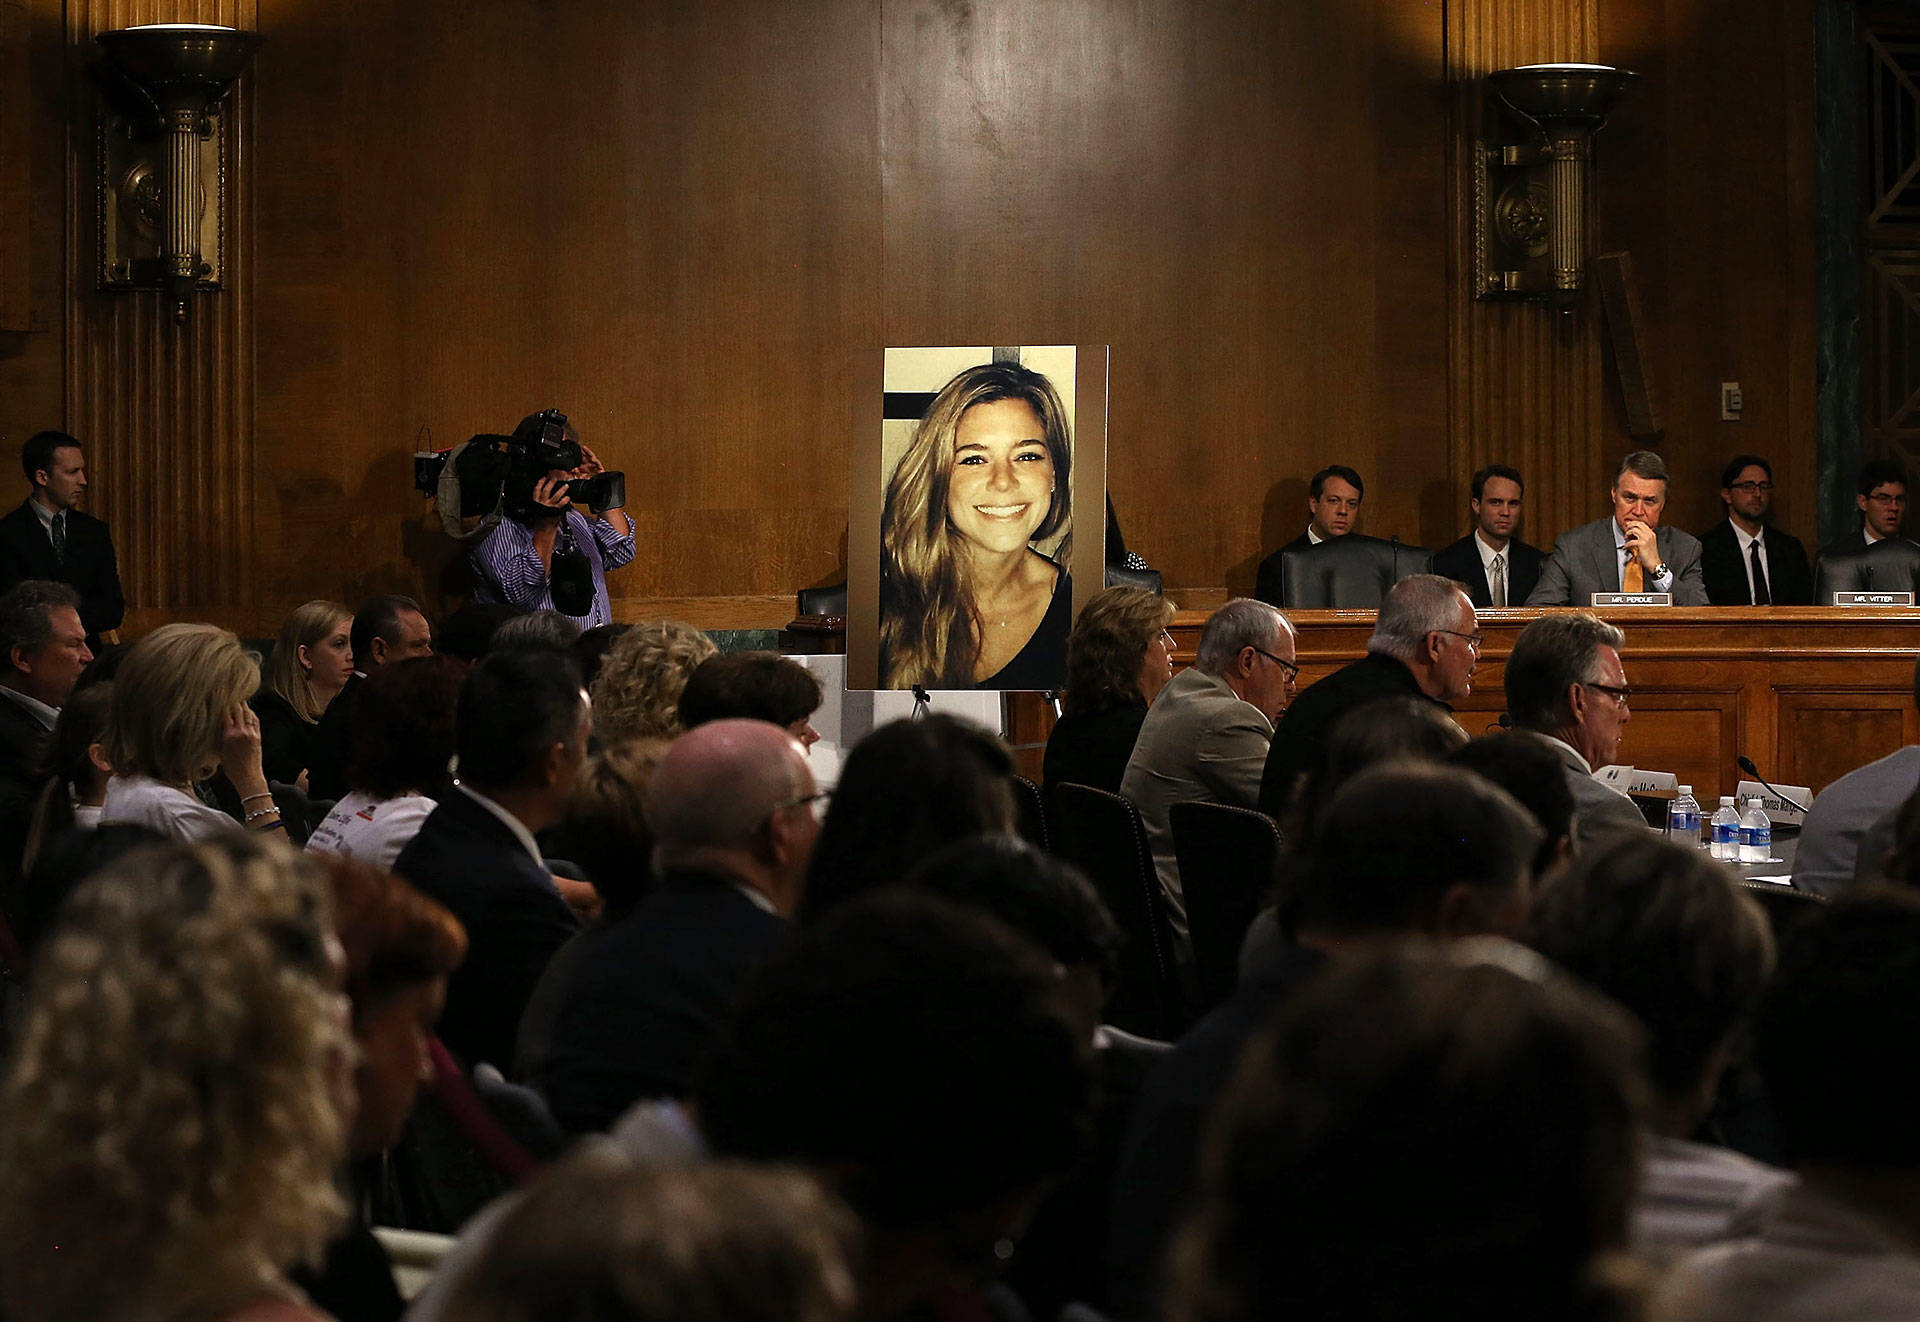 A large photo of Kathryn Steinle is shown while her dad, James Steinle, testifies during a Senate Judiciary Committee hearing on Capitol Hill, July 21, 2015, in Washington, D.C. The committee heard testimony from family members who have had loved ones killed by undocumented immigrants. Mark Wilson/Getty Images